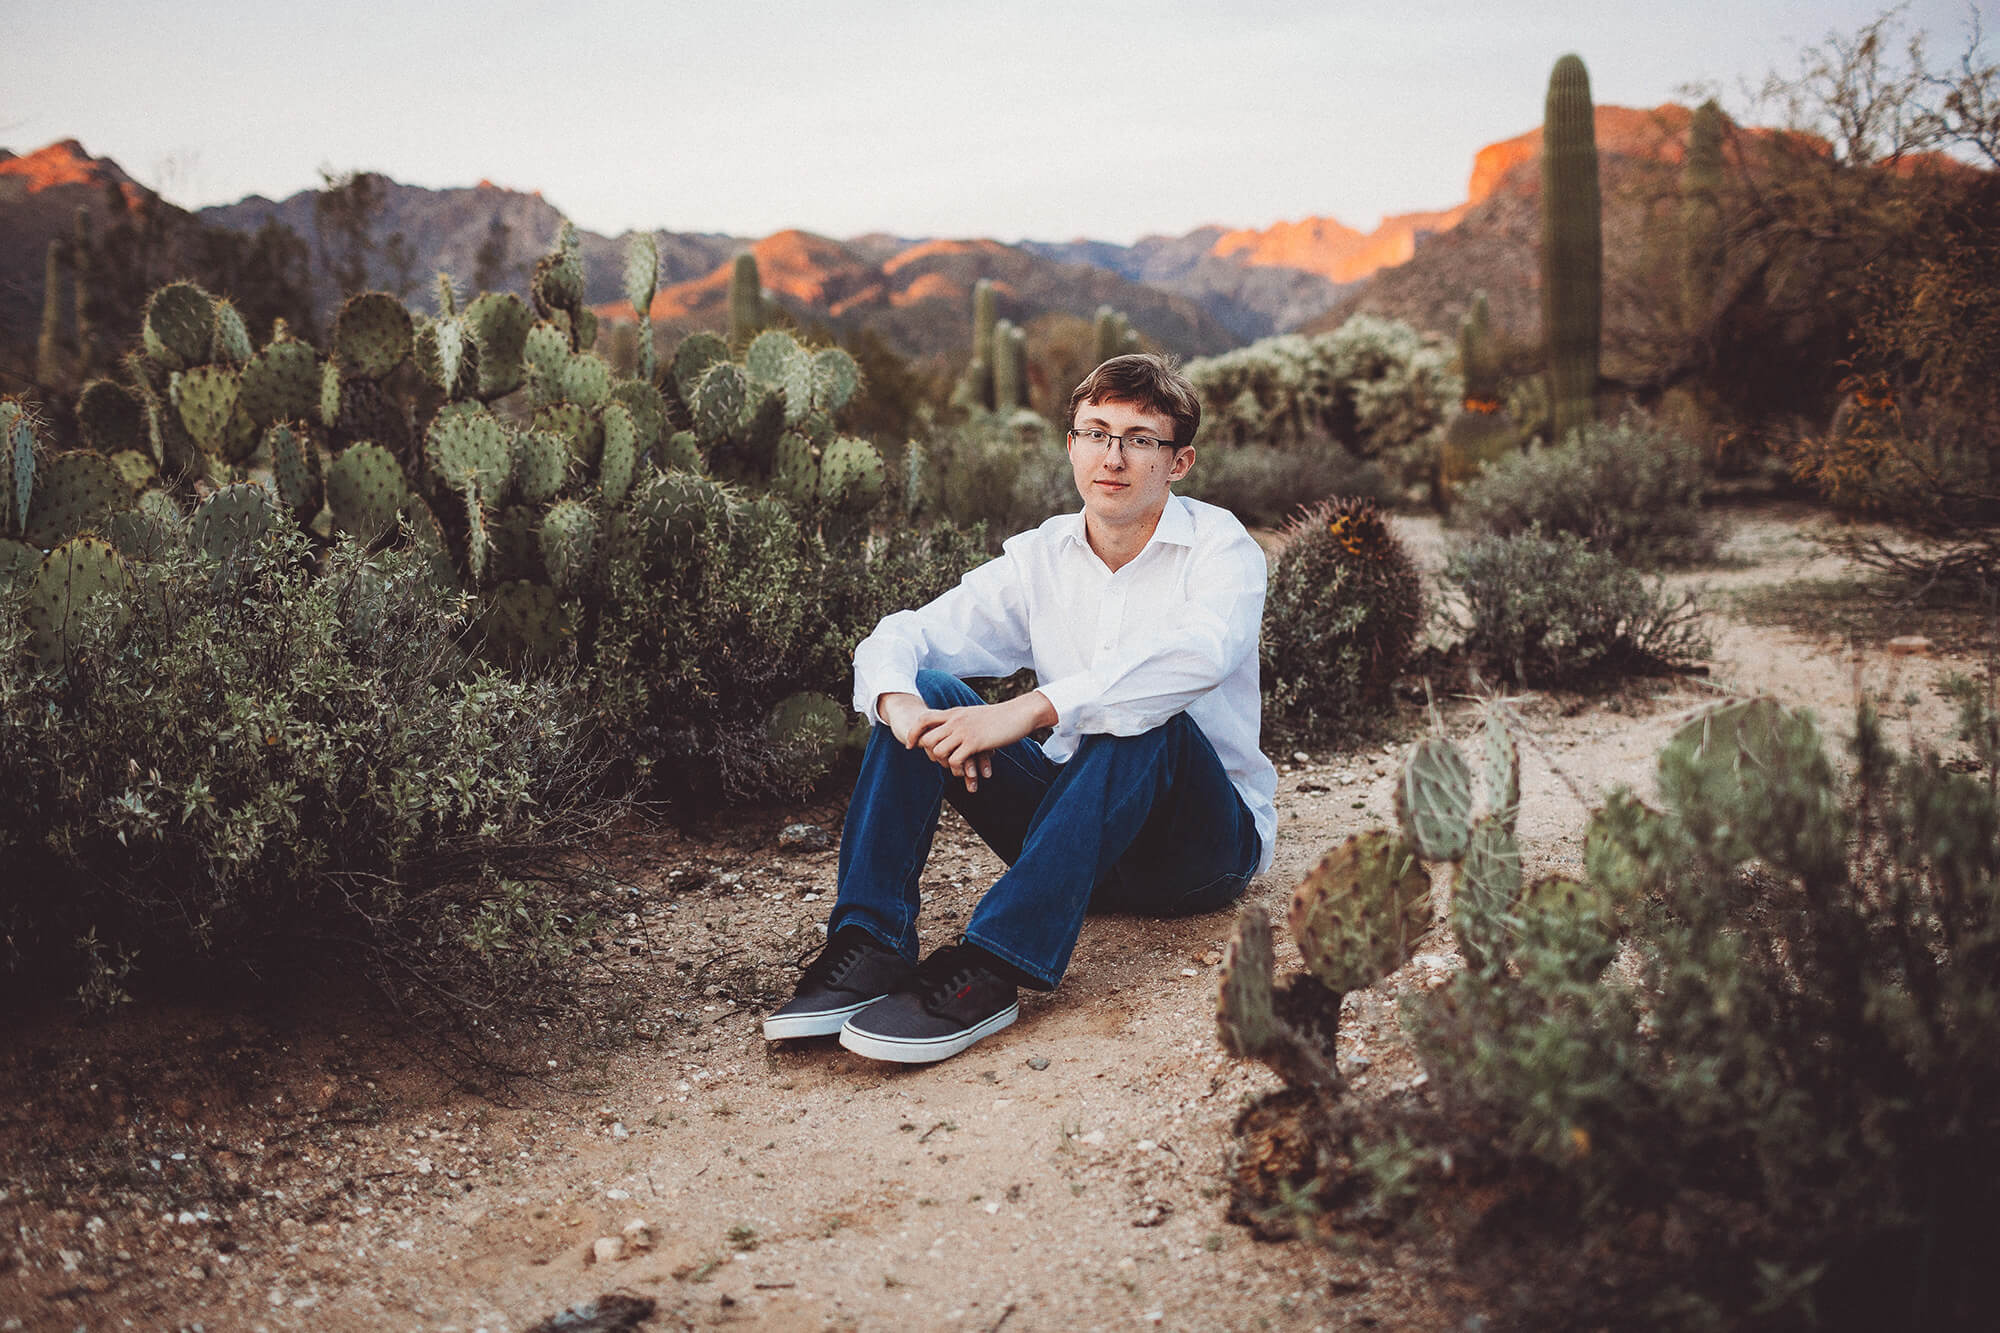 Cory sitting on the ground with the Catalina mountains behind him